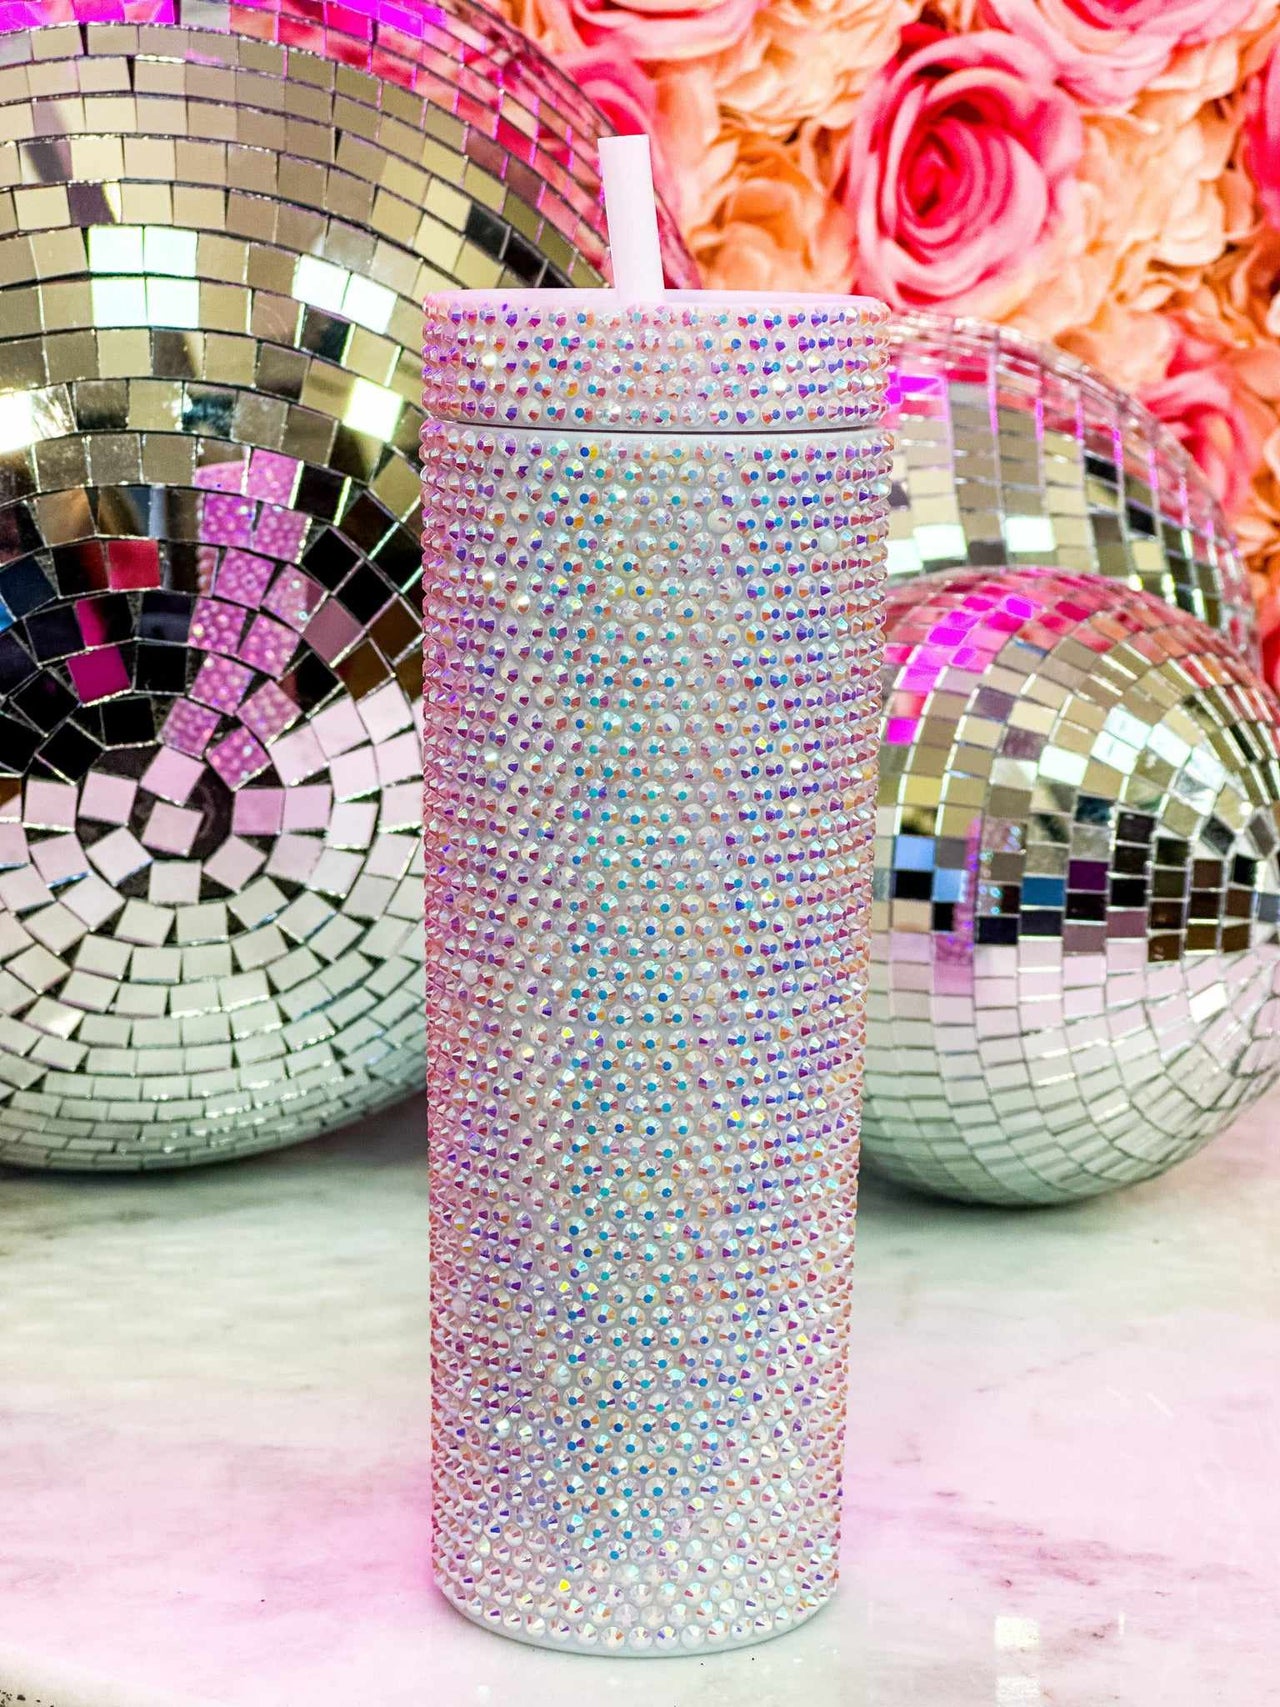 Buy Glitter Bedazzle Cup Silver Iridescent Now